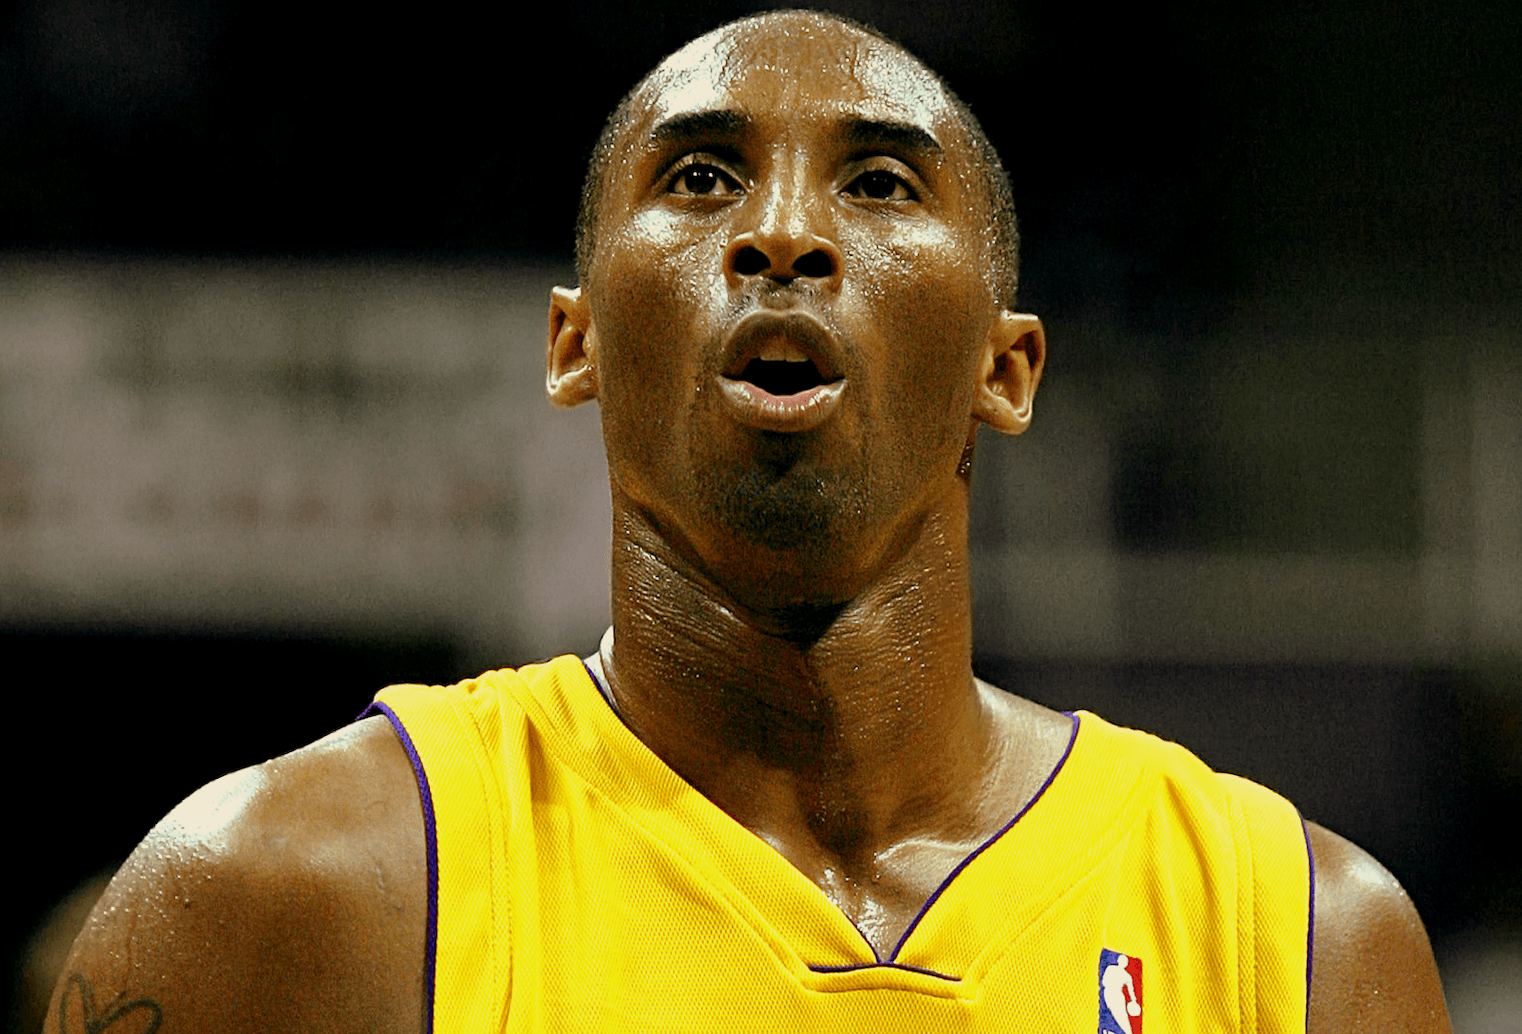 Chilling Footage Emerges of Kobe Bryant's Helicopter Flying Erratically